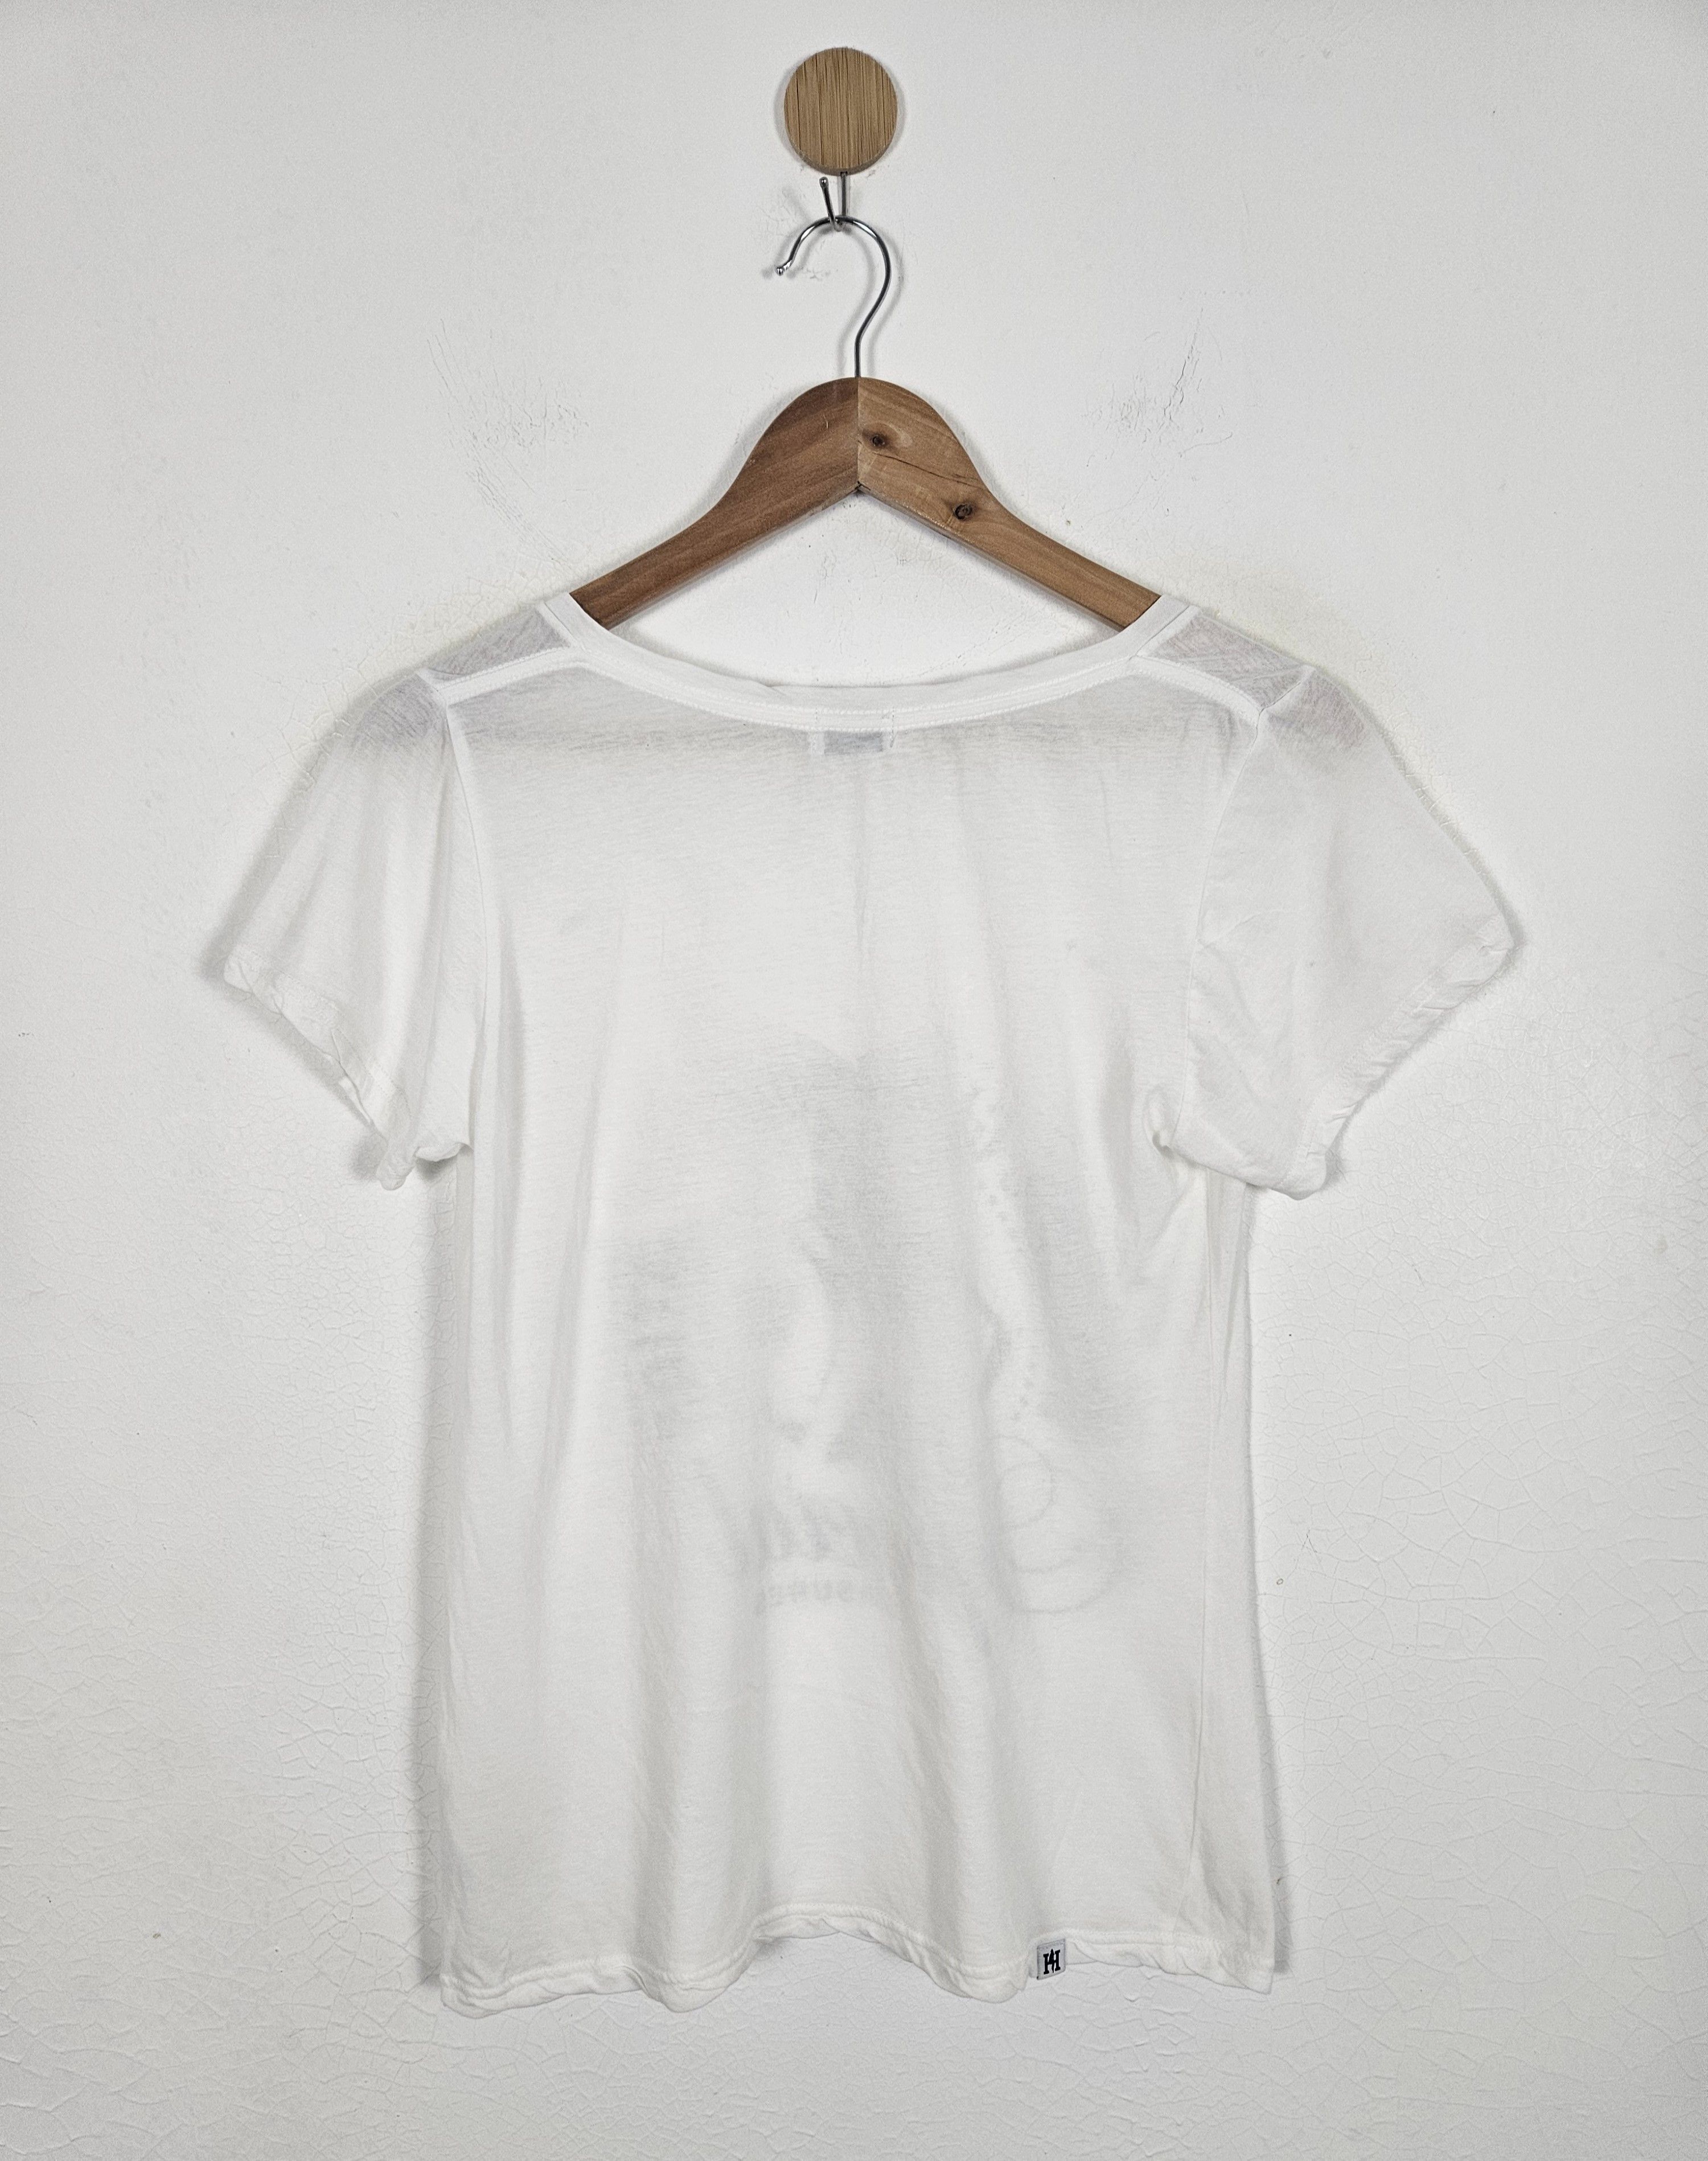 Hysteric Glamour Special Pleasure shirt - 2